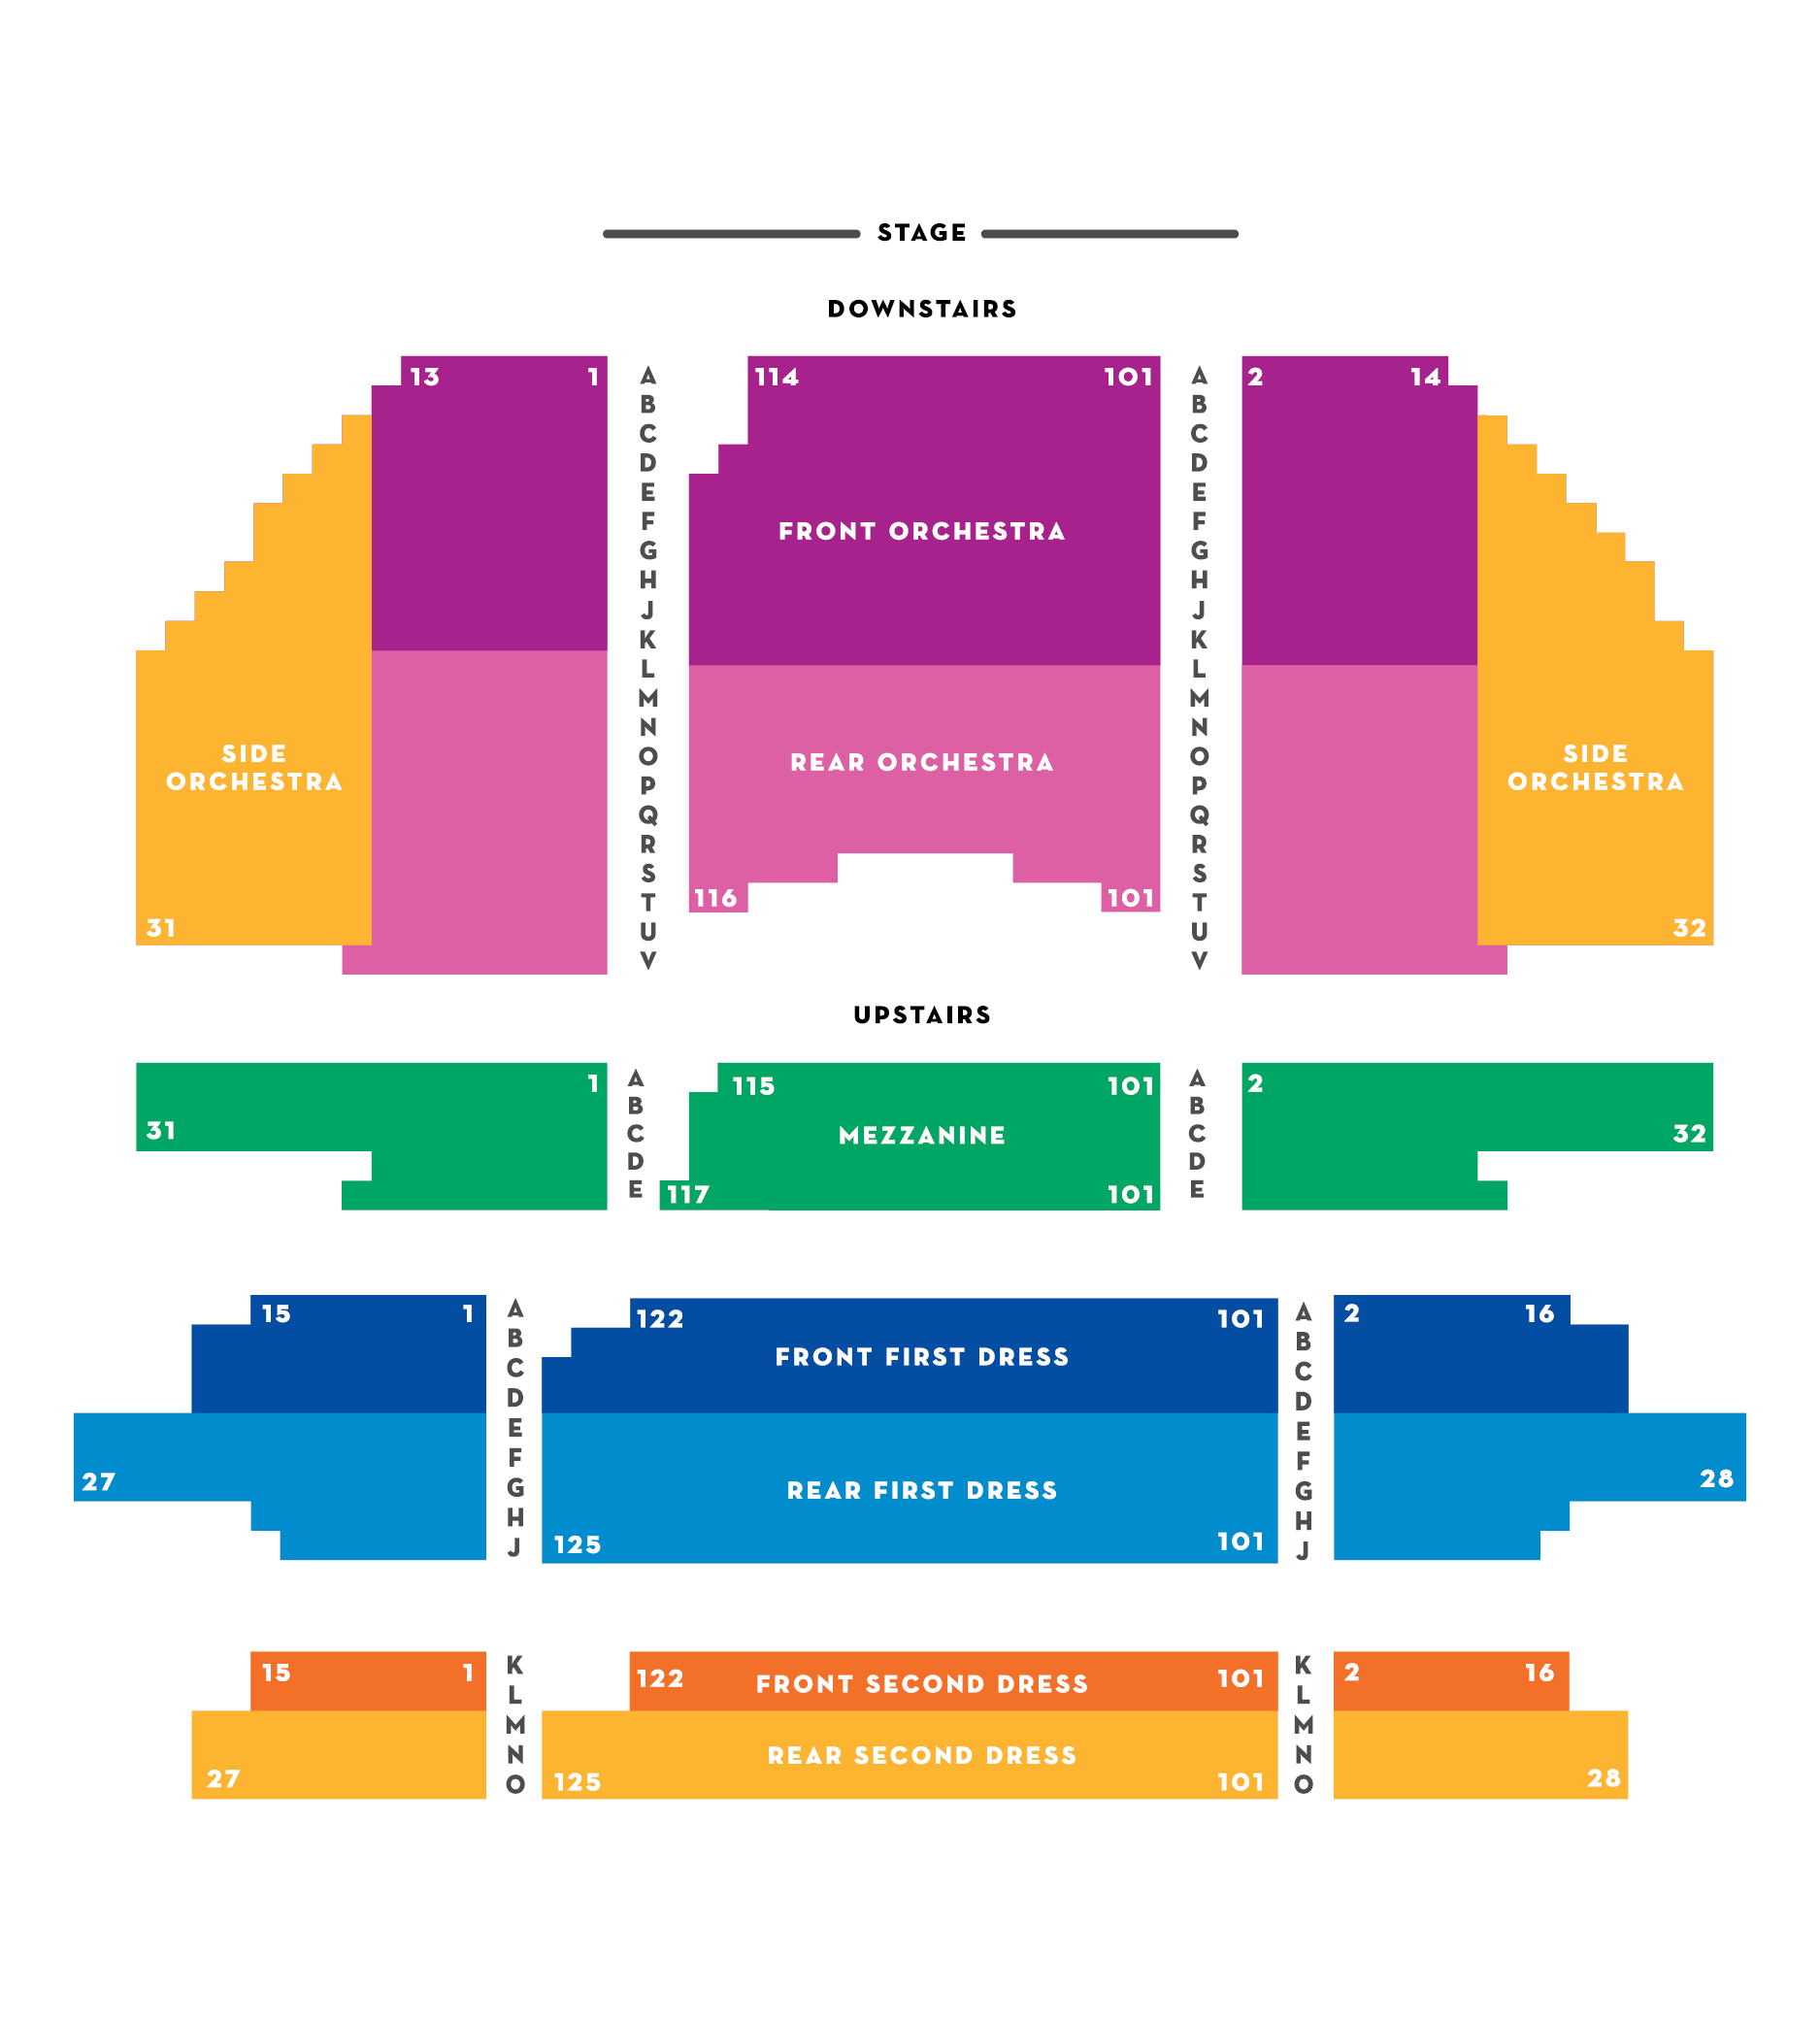 Seating Chart Website